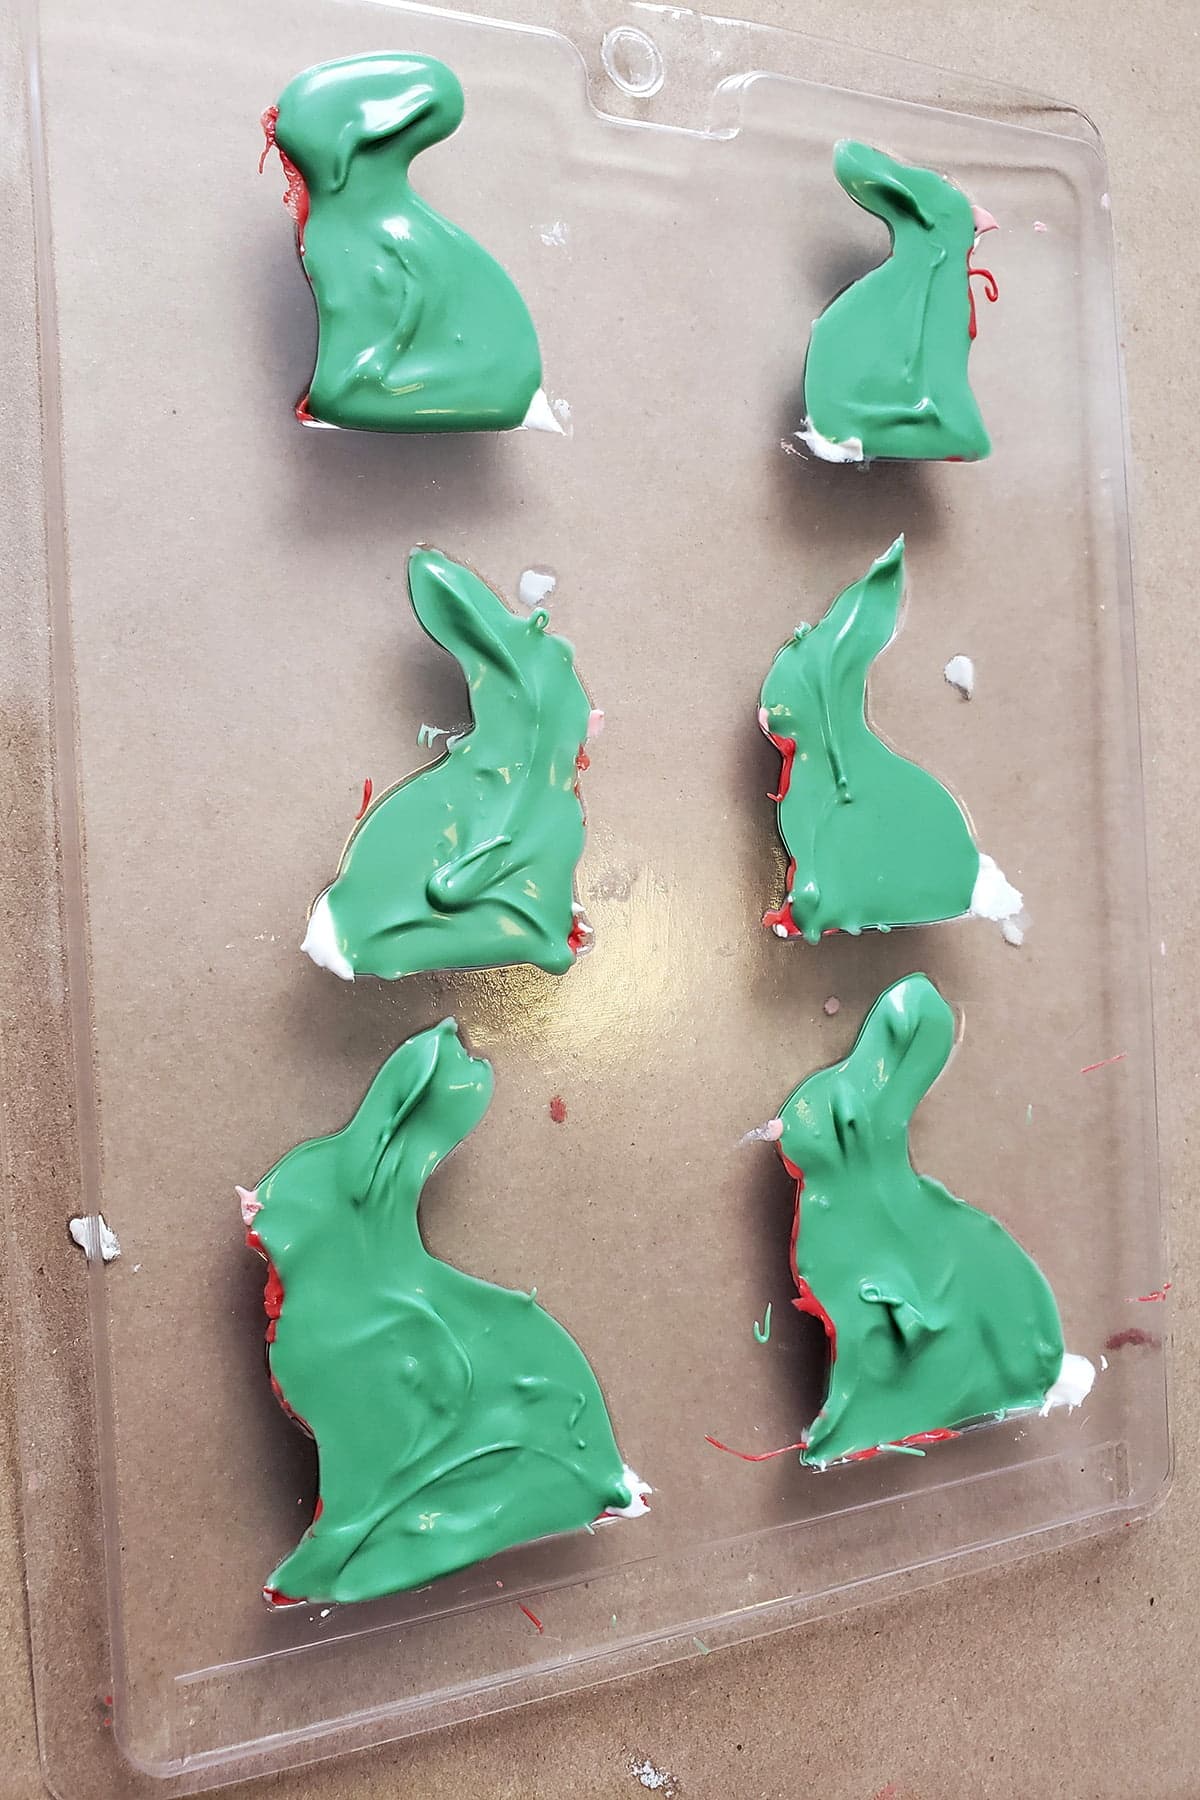 A plastic mold with 6 bunny shaped cavities is shown filled up with green melted candy.